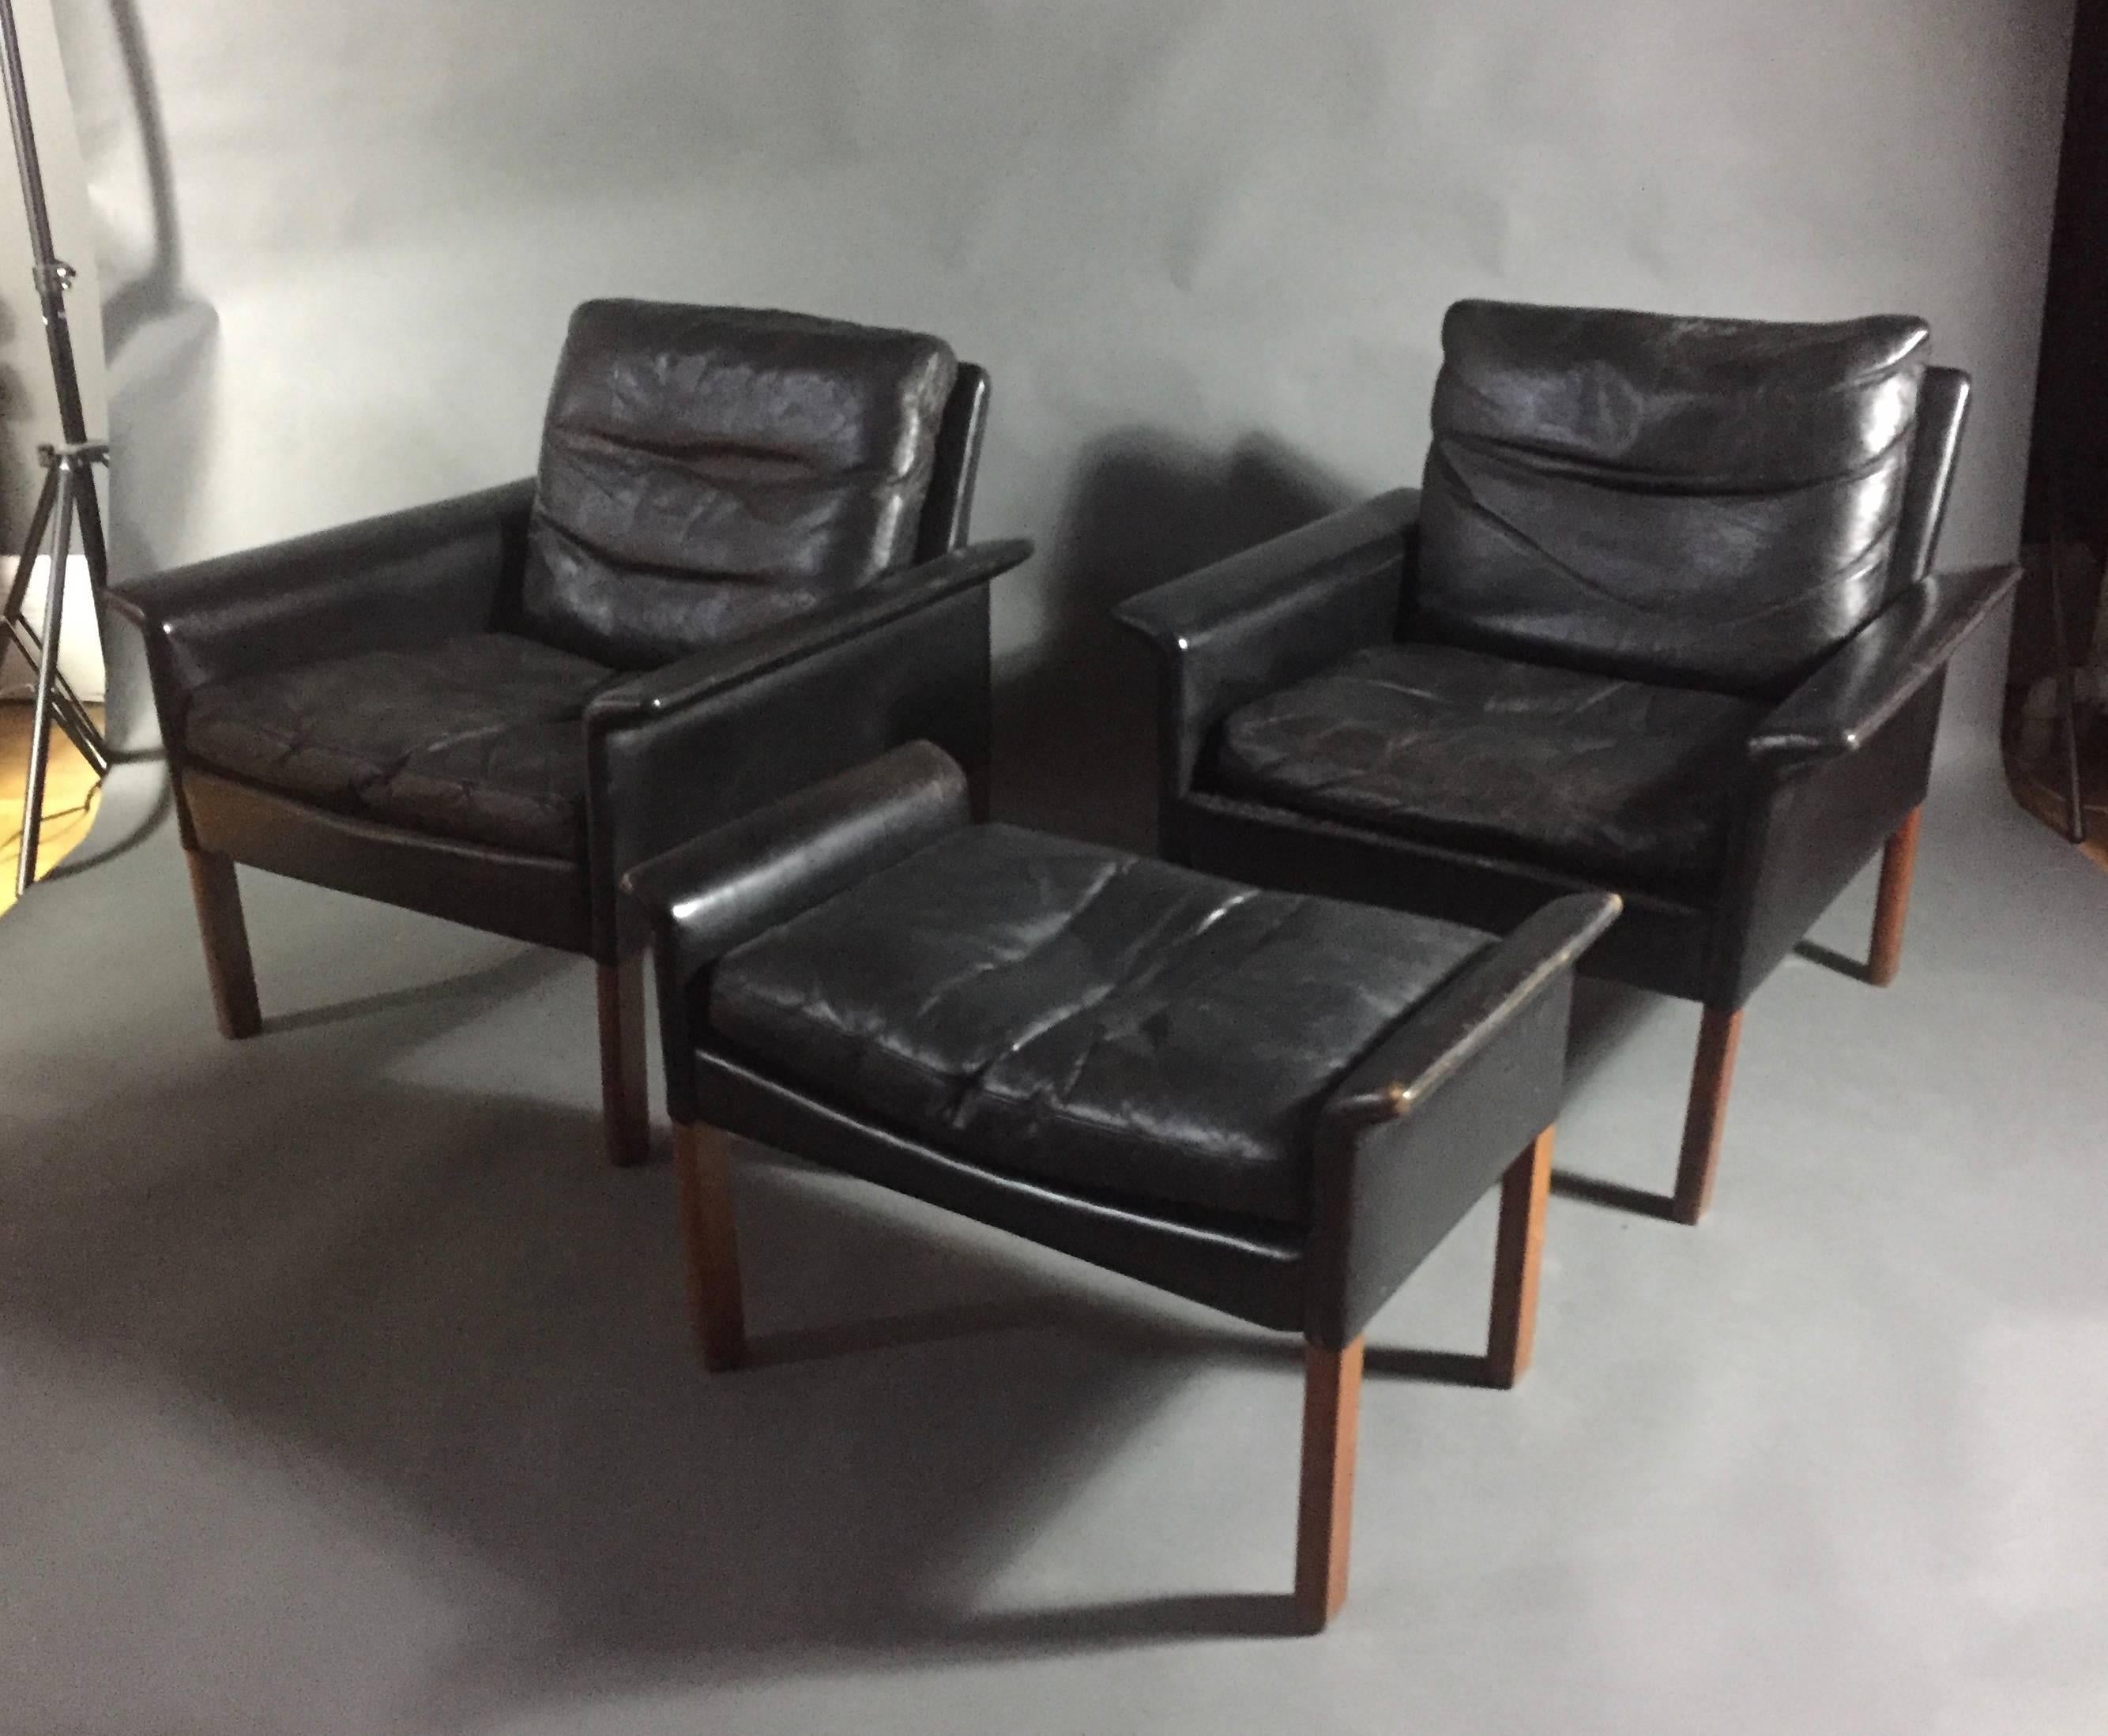 Perfect Scandinavian design by Hans Olsen with flared armrests - in wonderfully vintage black leather and solid rosewood legs. Loose seat cushions are down filled for comfort. Made by C.S. Mobler, Glostrup Denmark in the mid-1960s. Includes lne